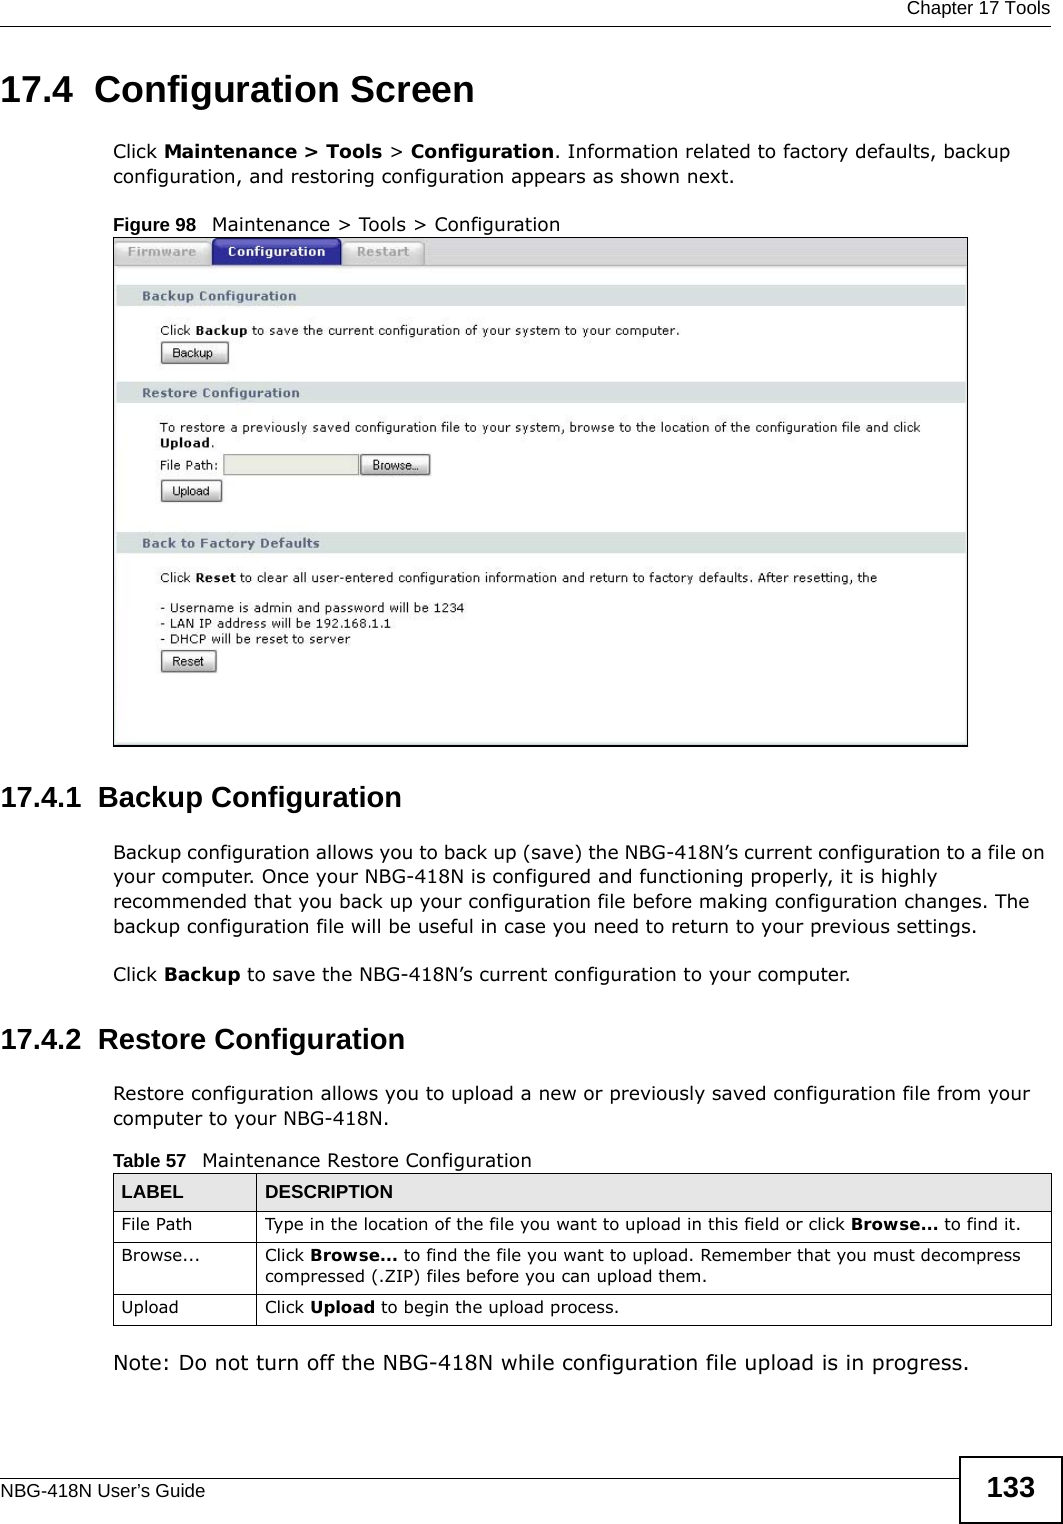  Chapter 17 ToolsNBG-418N User’s Guide 13317.4  Configuration ScreenClick Maintenance &gt; Tools &gt; Configuration. Information related to factory defaults, backup configuration, and restoring configuration appears as shown next.Figure 98   Maintenance &gt; Tools &gt; Configuration 17.4.1  Backup ConfigurationBackup configuration allows you to back up (save) the NBG-418N’s current configuration to a file on your computer. Once your NBG-418N is configured and functioning properly, it is highly recommended that you back up your configuration file before making configuration changes. The backup configuration file will be useful in case you need to return to your previous settings. Click Backup to save the NBG-418N’s current configuration to your computer.17.4.2  Restore ConfigurationRestore configuration allows you to upload a new or previously saved configuration file from your computer to your NBG-418N.Note: Do not turn off the NBG-418N while configuration file upload is in progress.Table 57   Maintenance Restore ConfigurationLABEL DESCRIPTIONFile Path  Type in the location of the file you want to upload in this field or click Browse... to find it.Browse...  Click Browse... to find the file you want to upload. Remember that you must decompress compressed (.ZIP) files before you can upload them. Upload  Click Upload to begin the upload process.